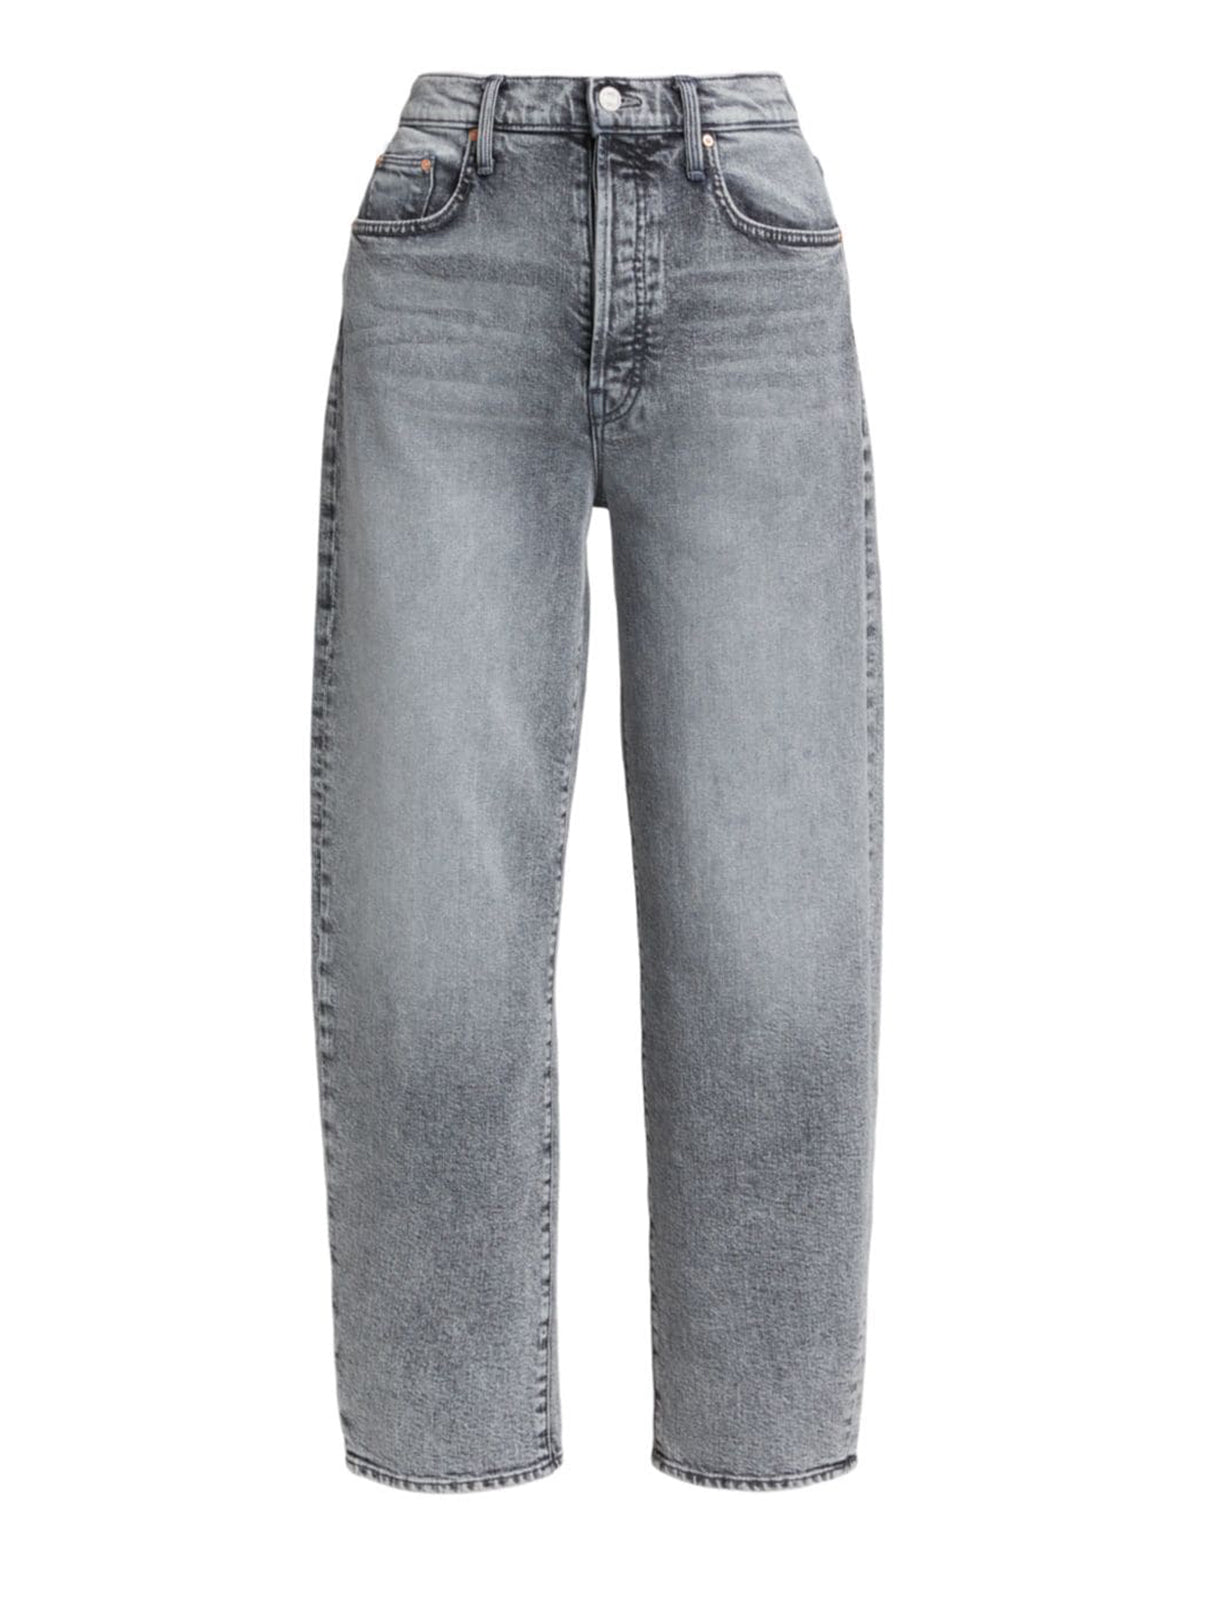 The Curbside Ankle Jeans